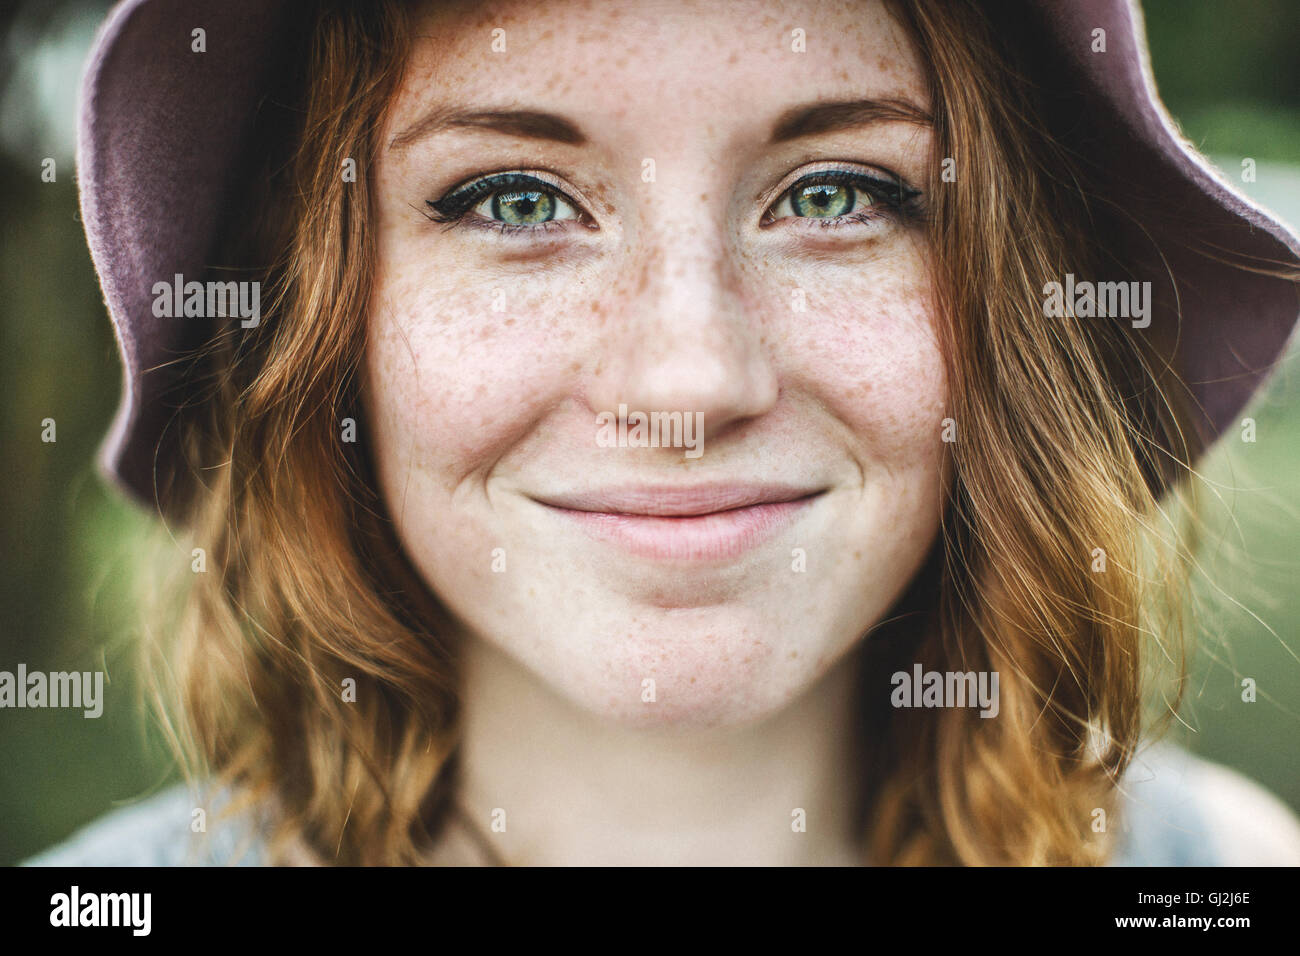 Portrait of freckled woman looking at camera smiling Stock Photo